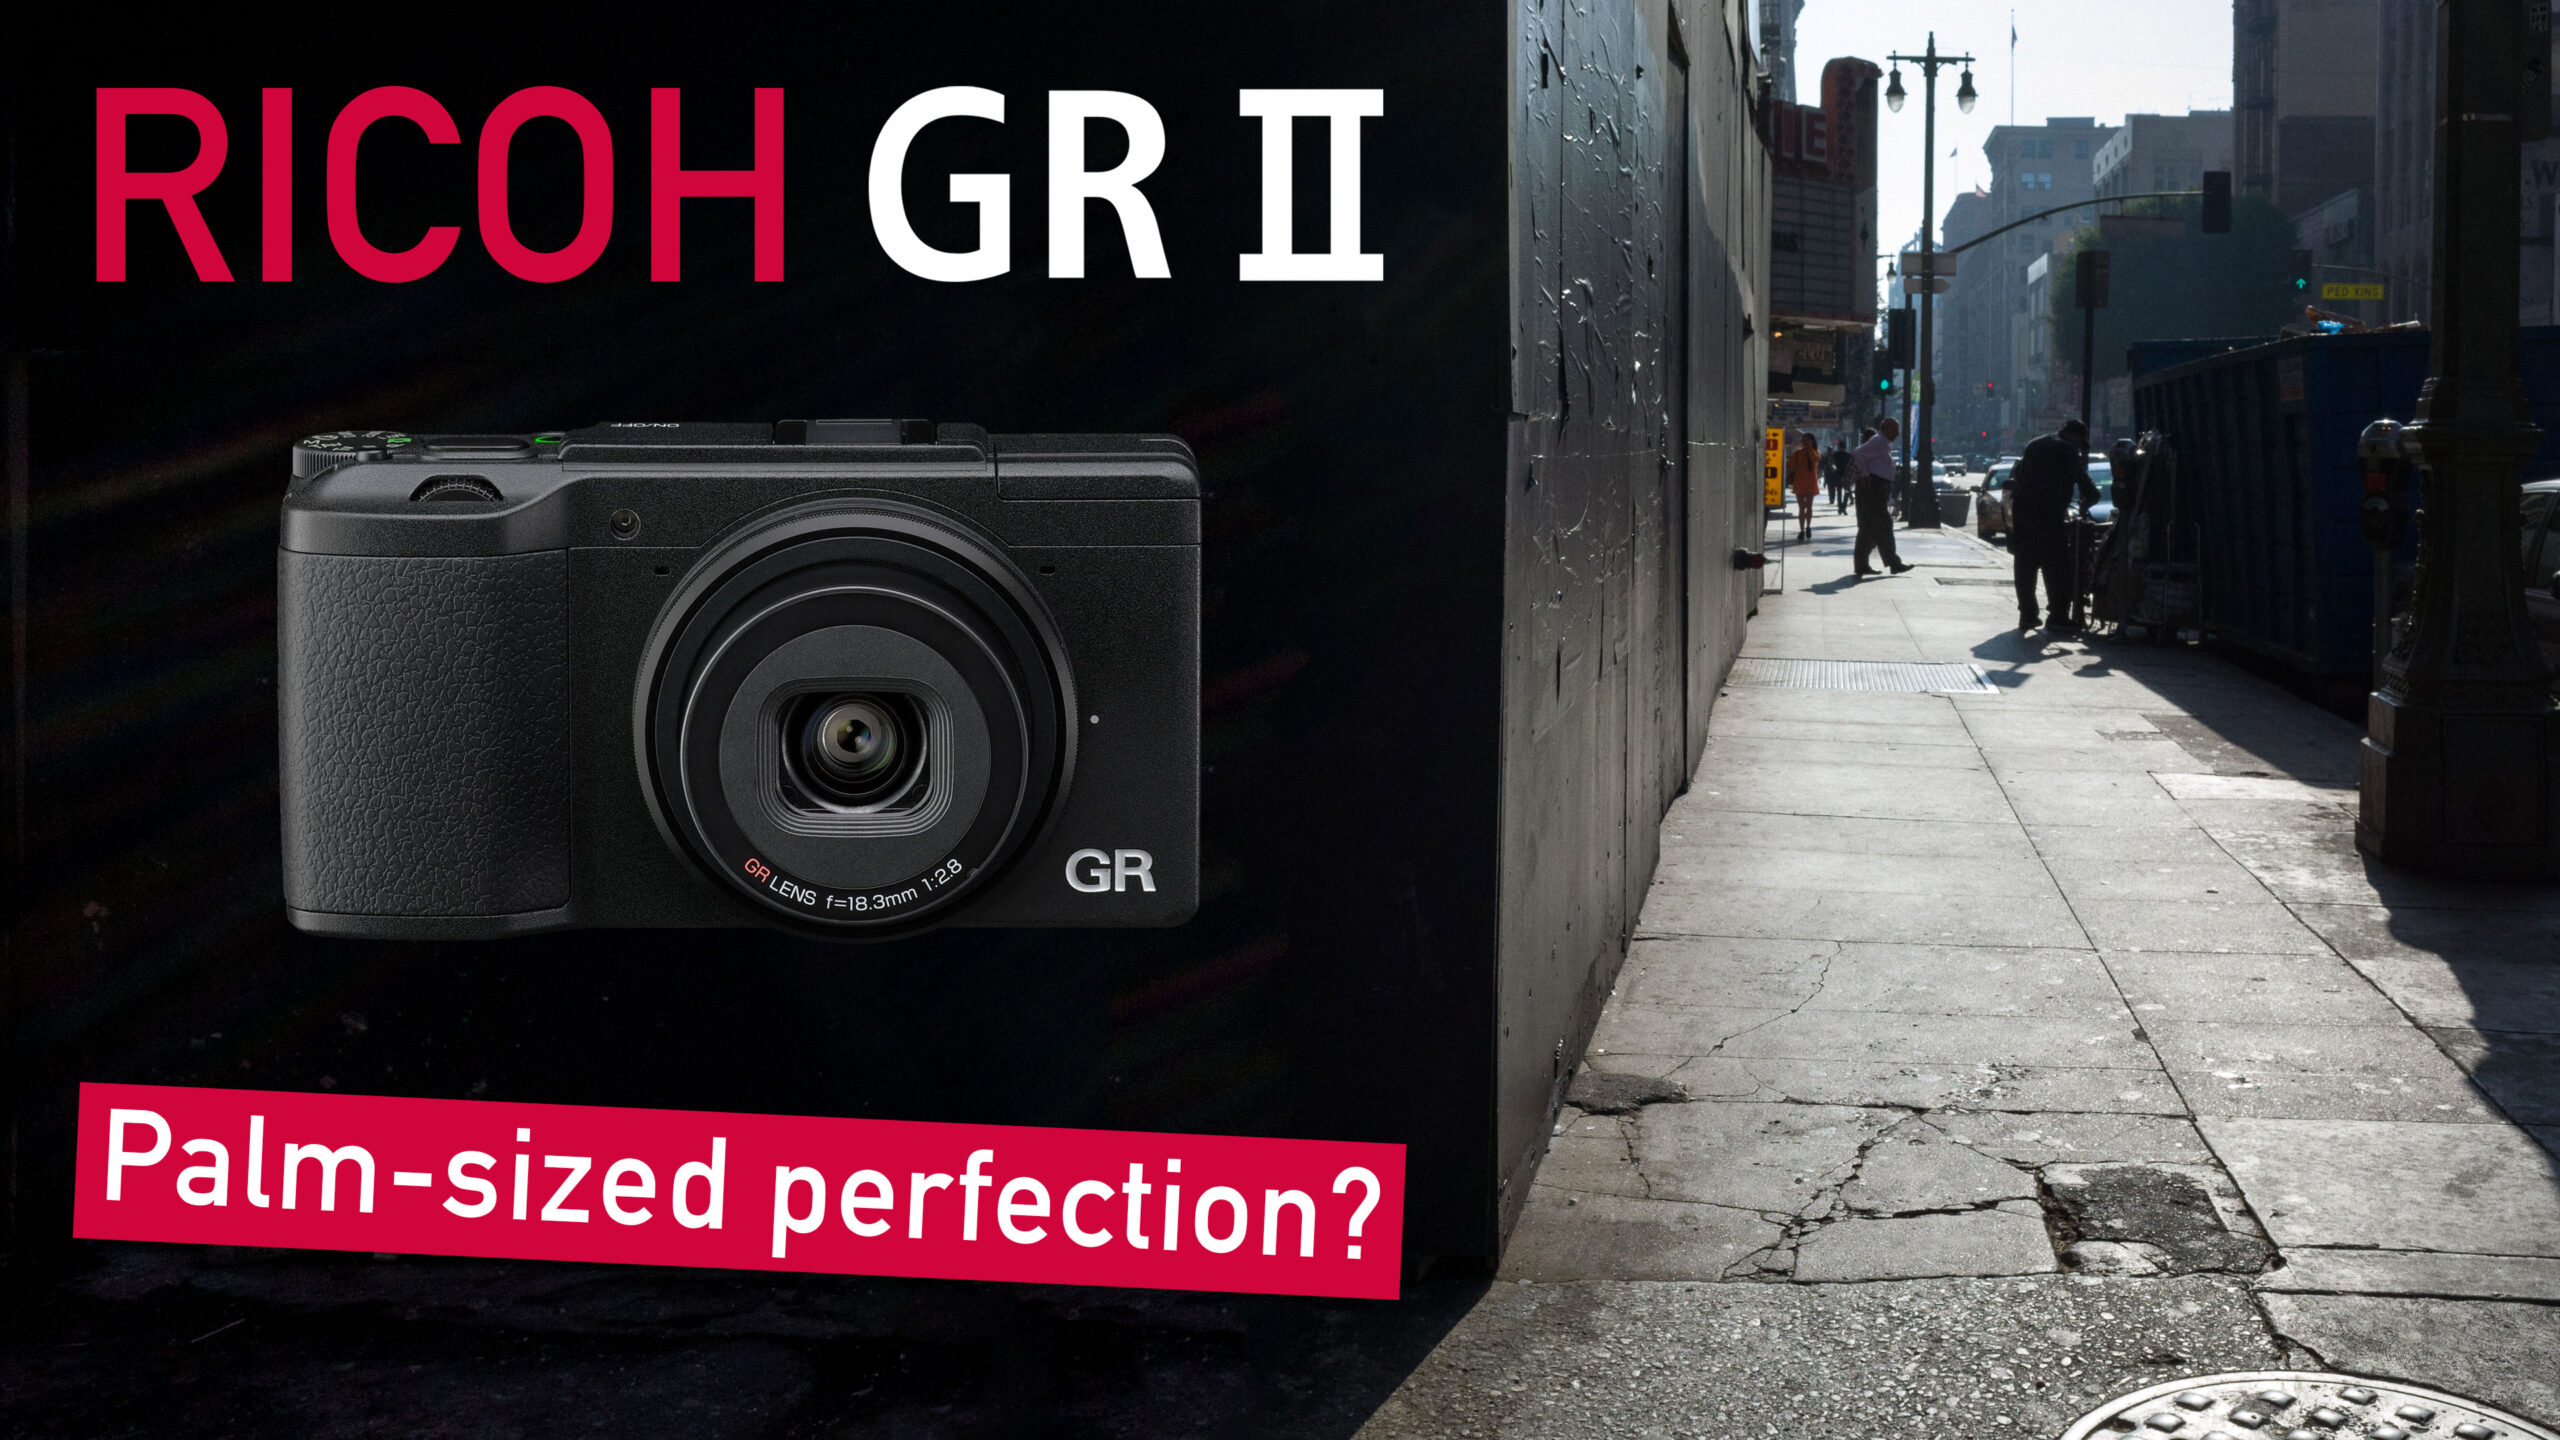 Ricoh GR II Street Photography Review - Palm-Sized Perfection?